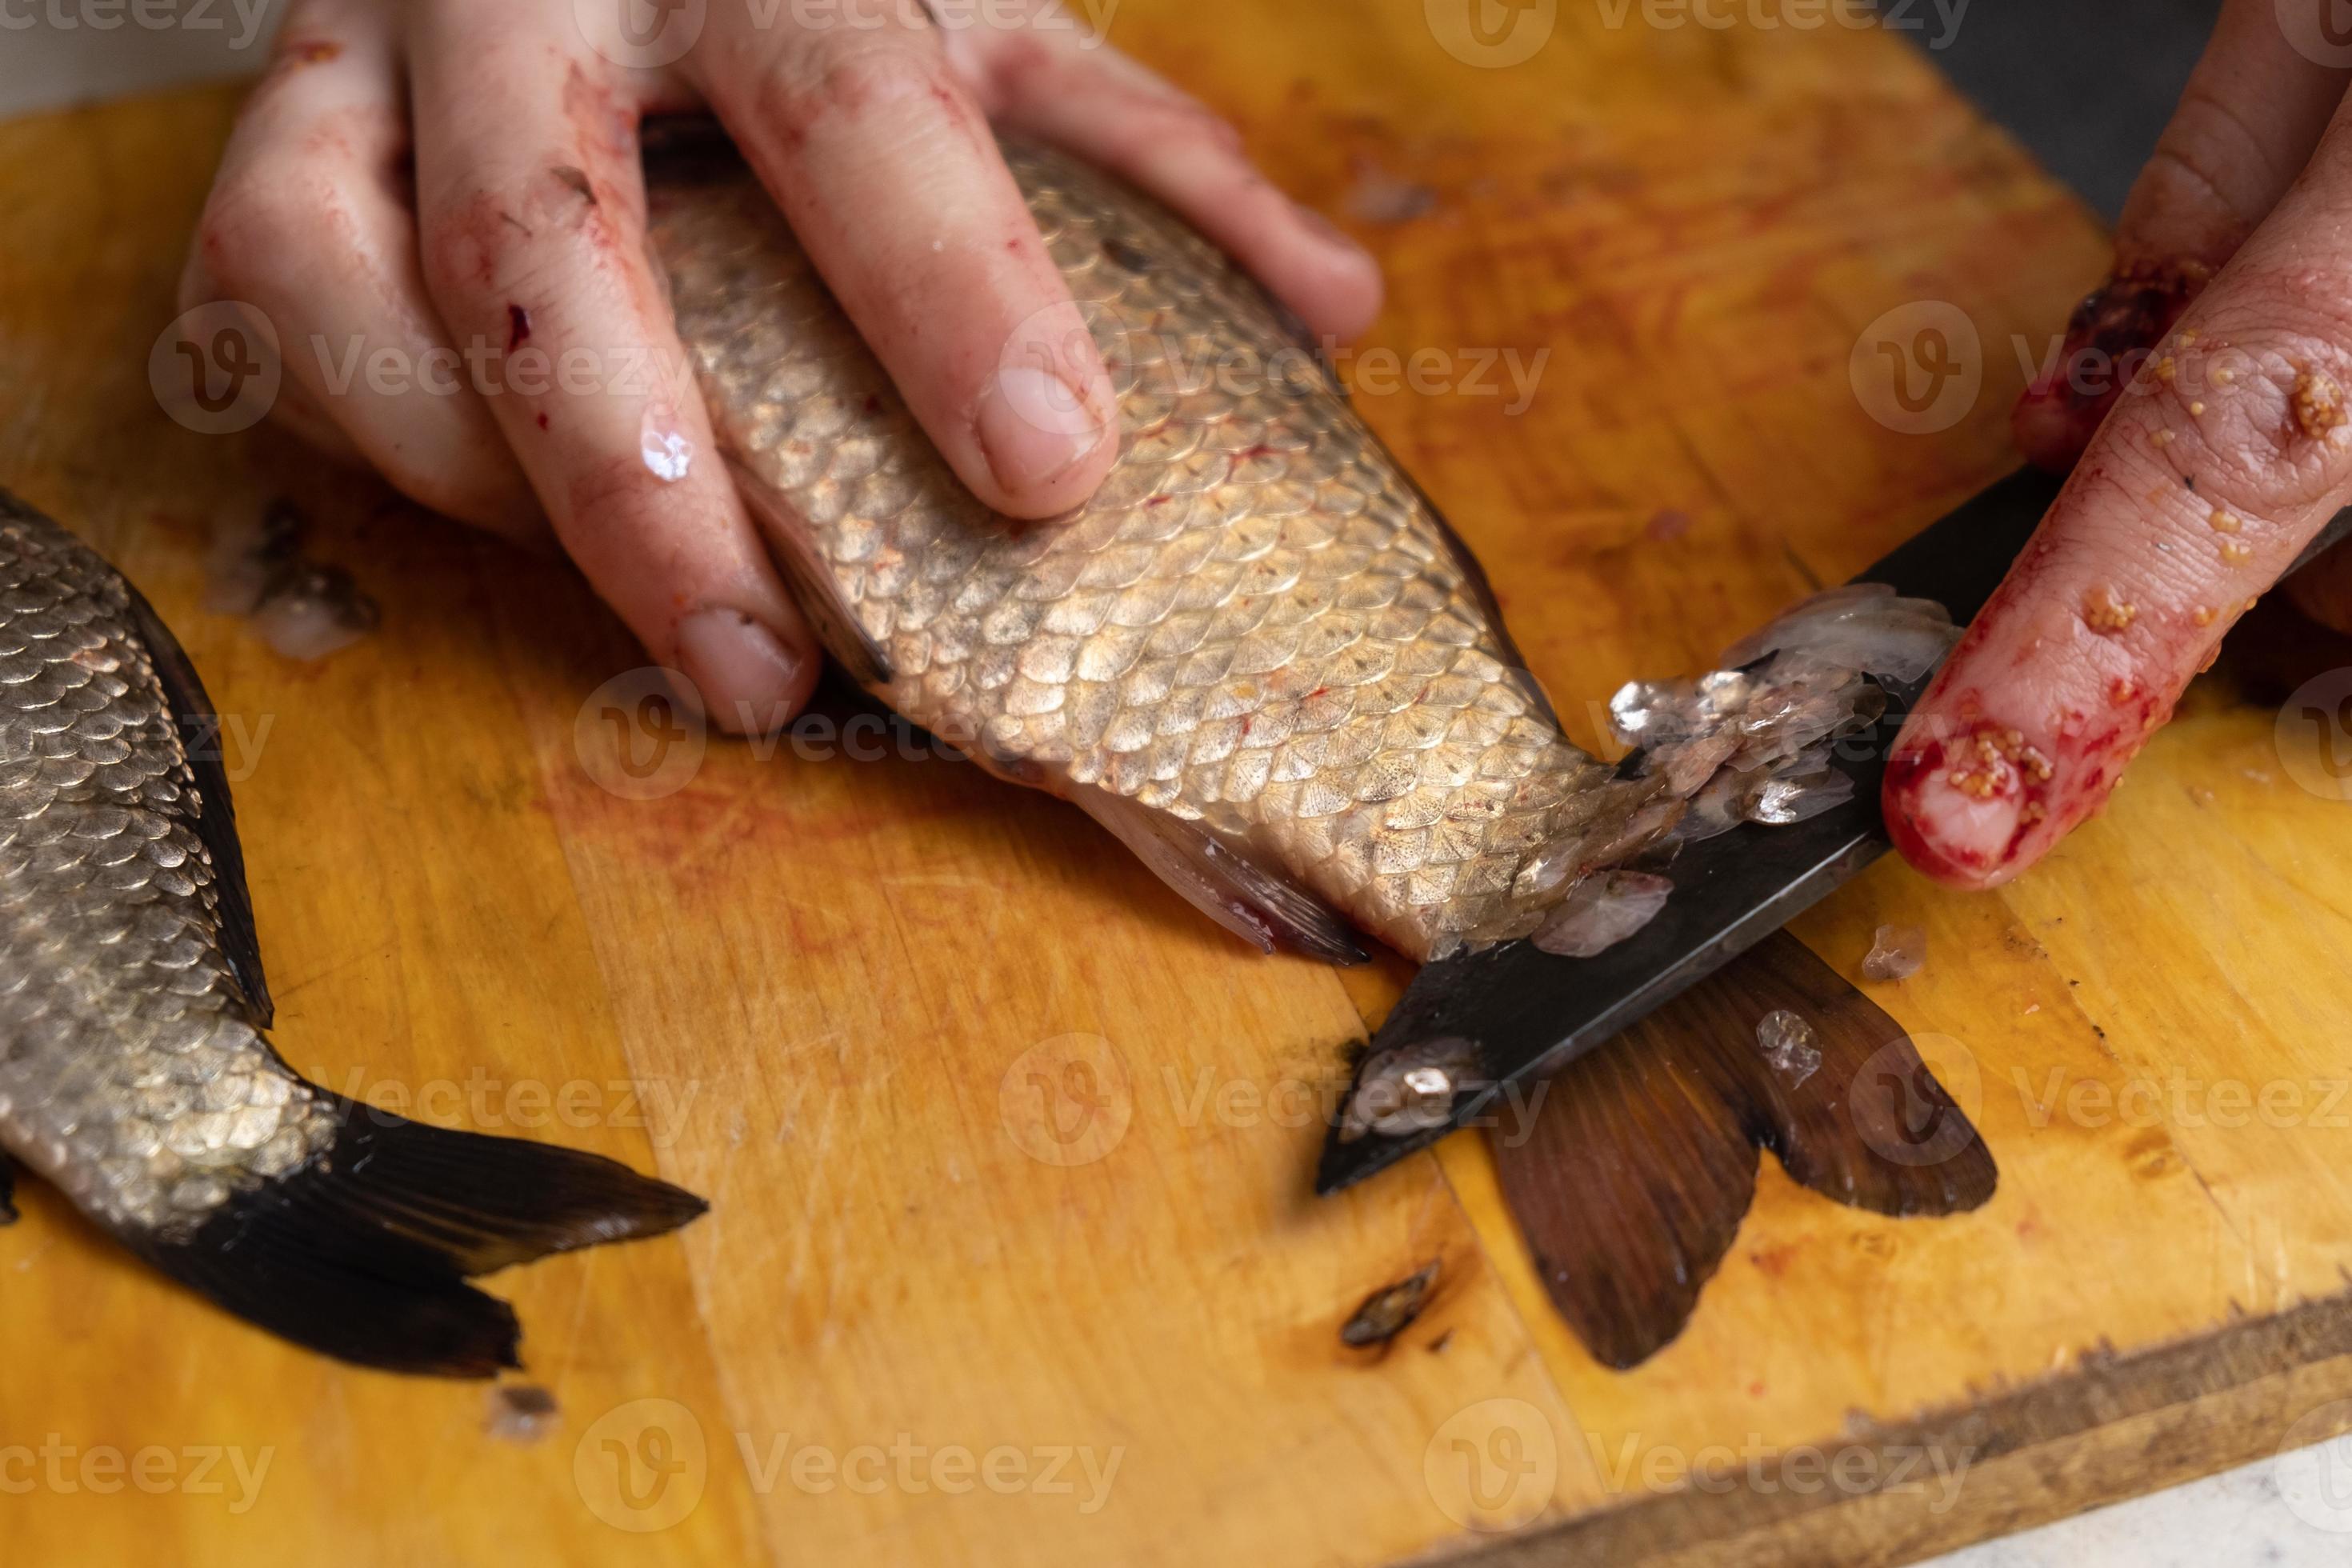 https://static.vecteezy.com/system/resources/previews/002/291/747/large_2x/freshwater-fish-cleaning-butchering-carp-with-a-knife-photo.JPG